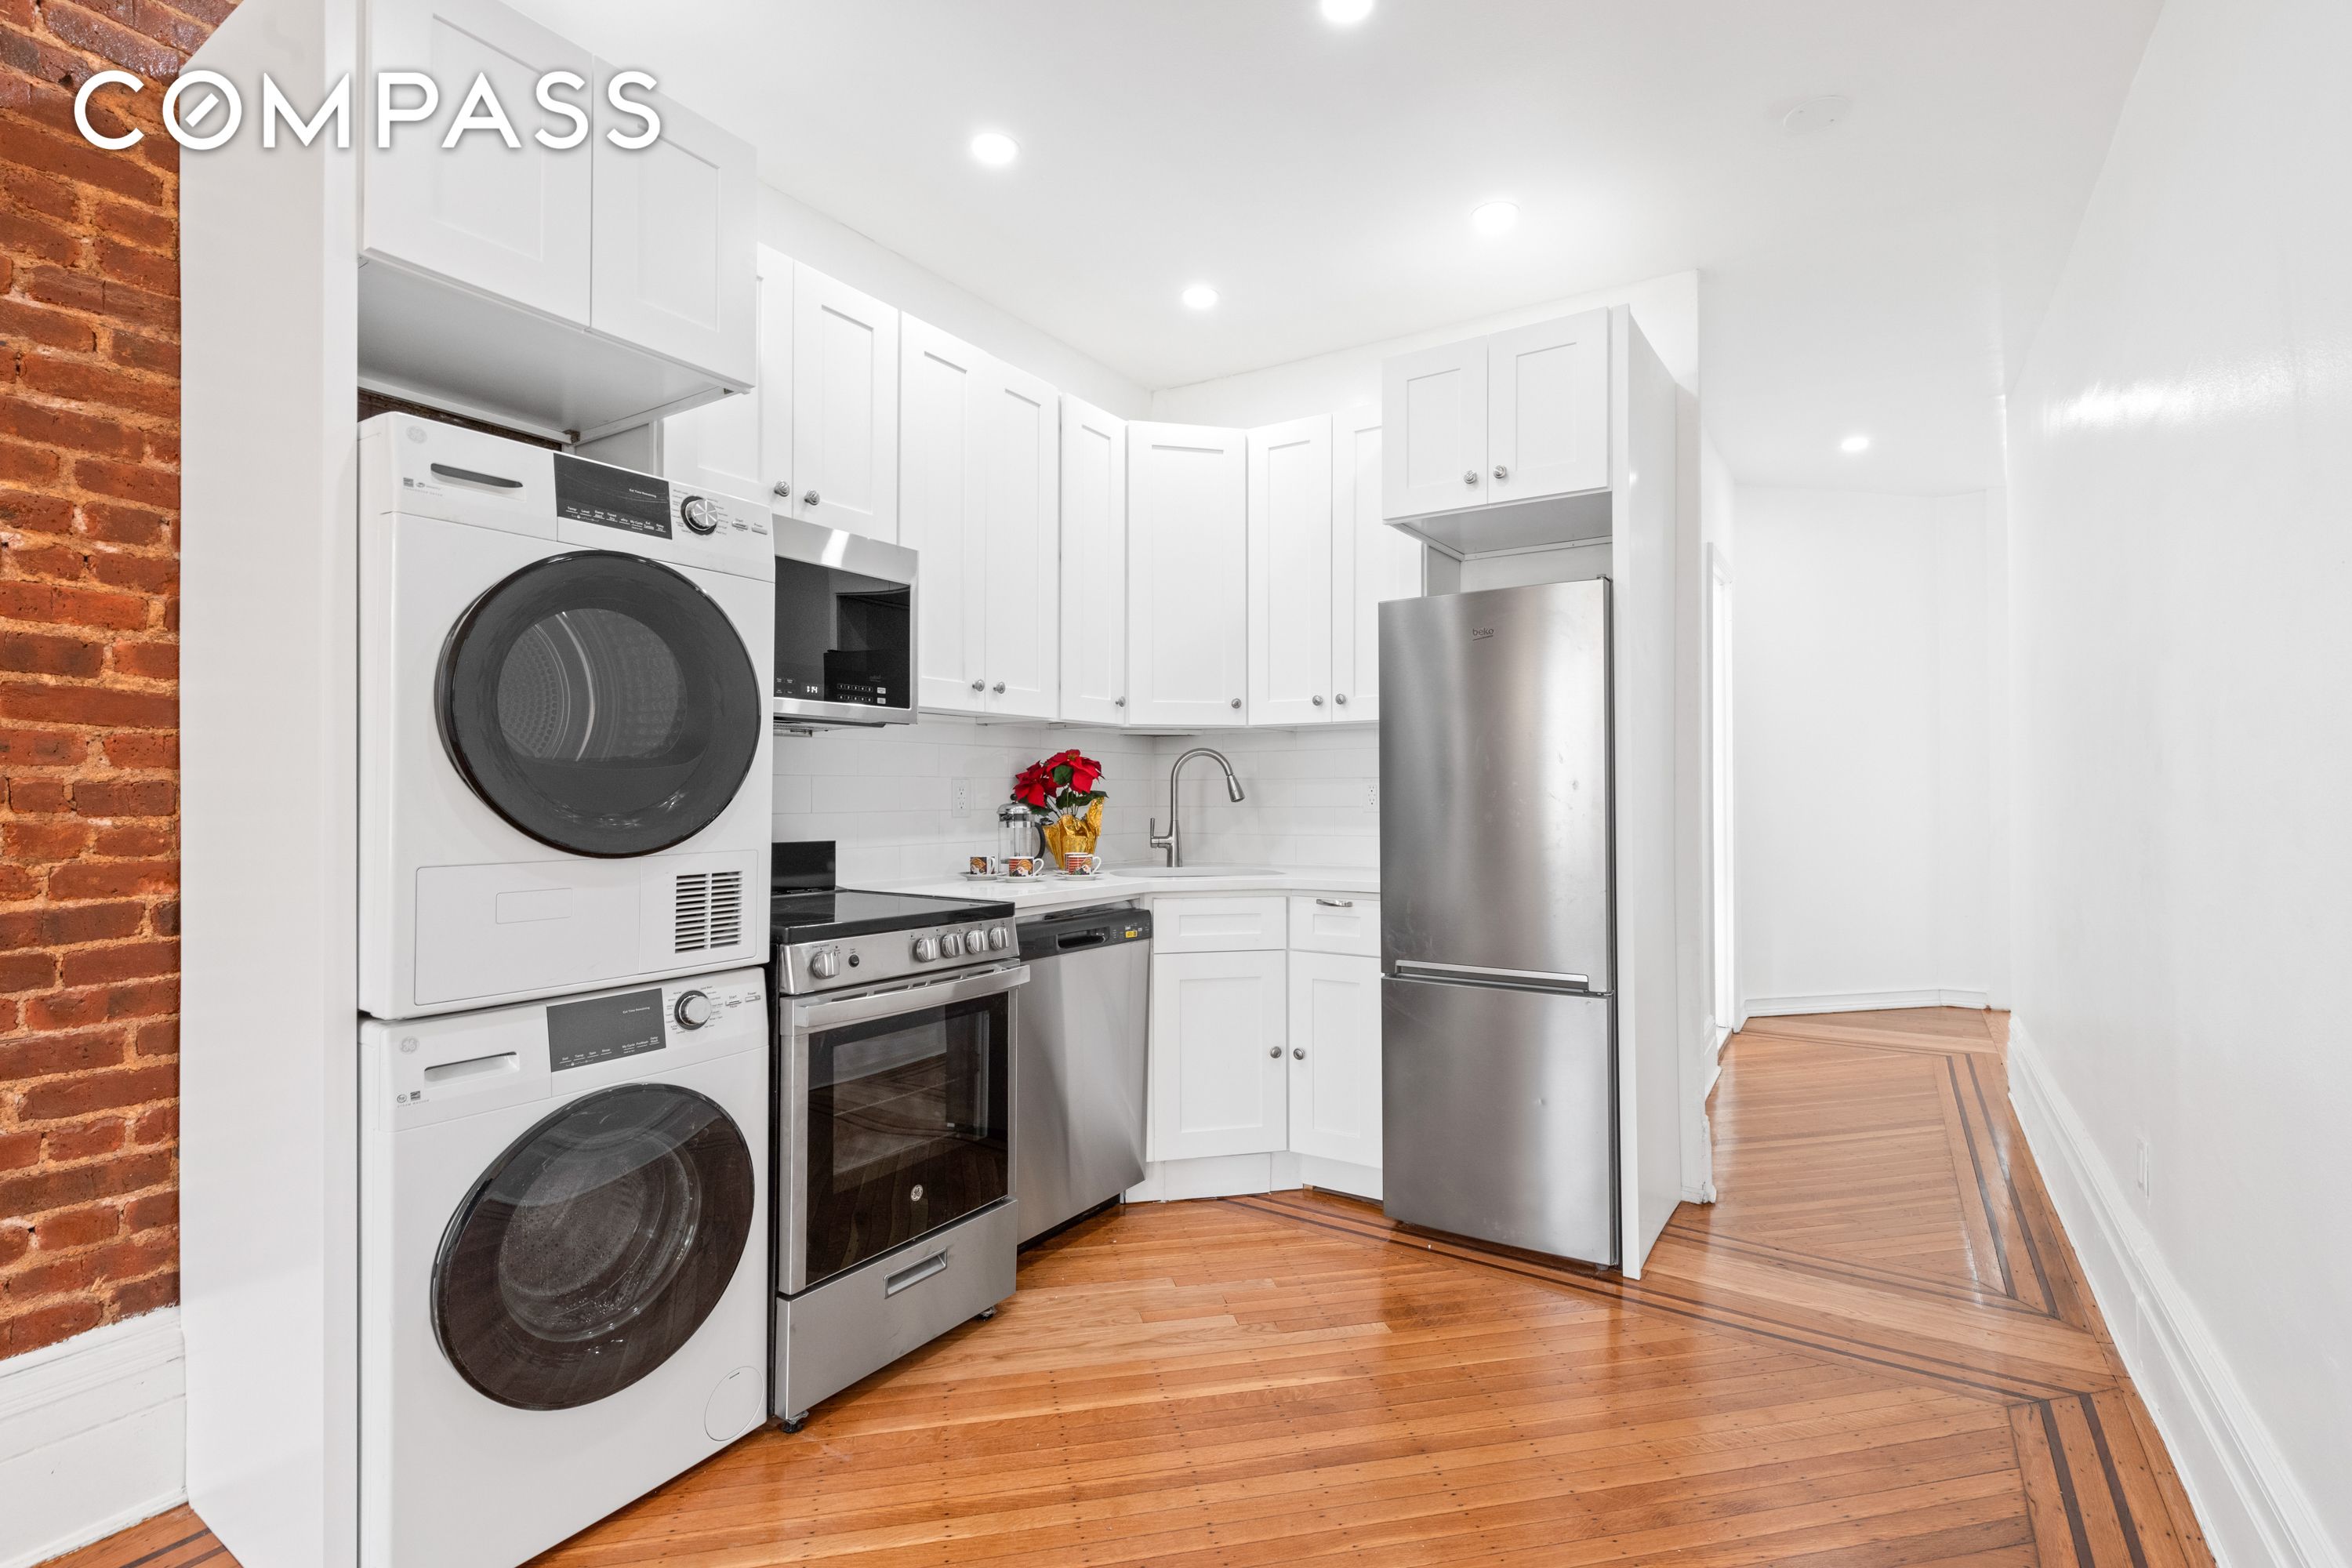 516 12th Street 1A, Park Slope, Brooklyn, New York - 3 Bedrooms  
2 Bathrooms  
4 Rooms - 